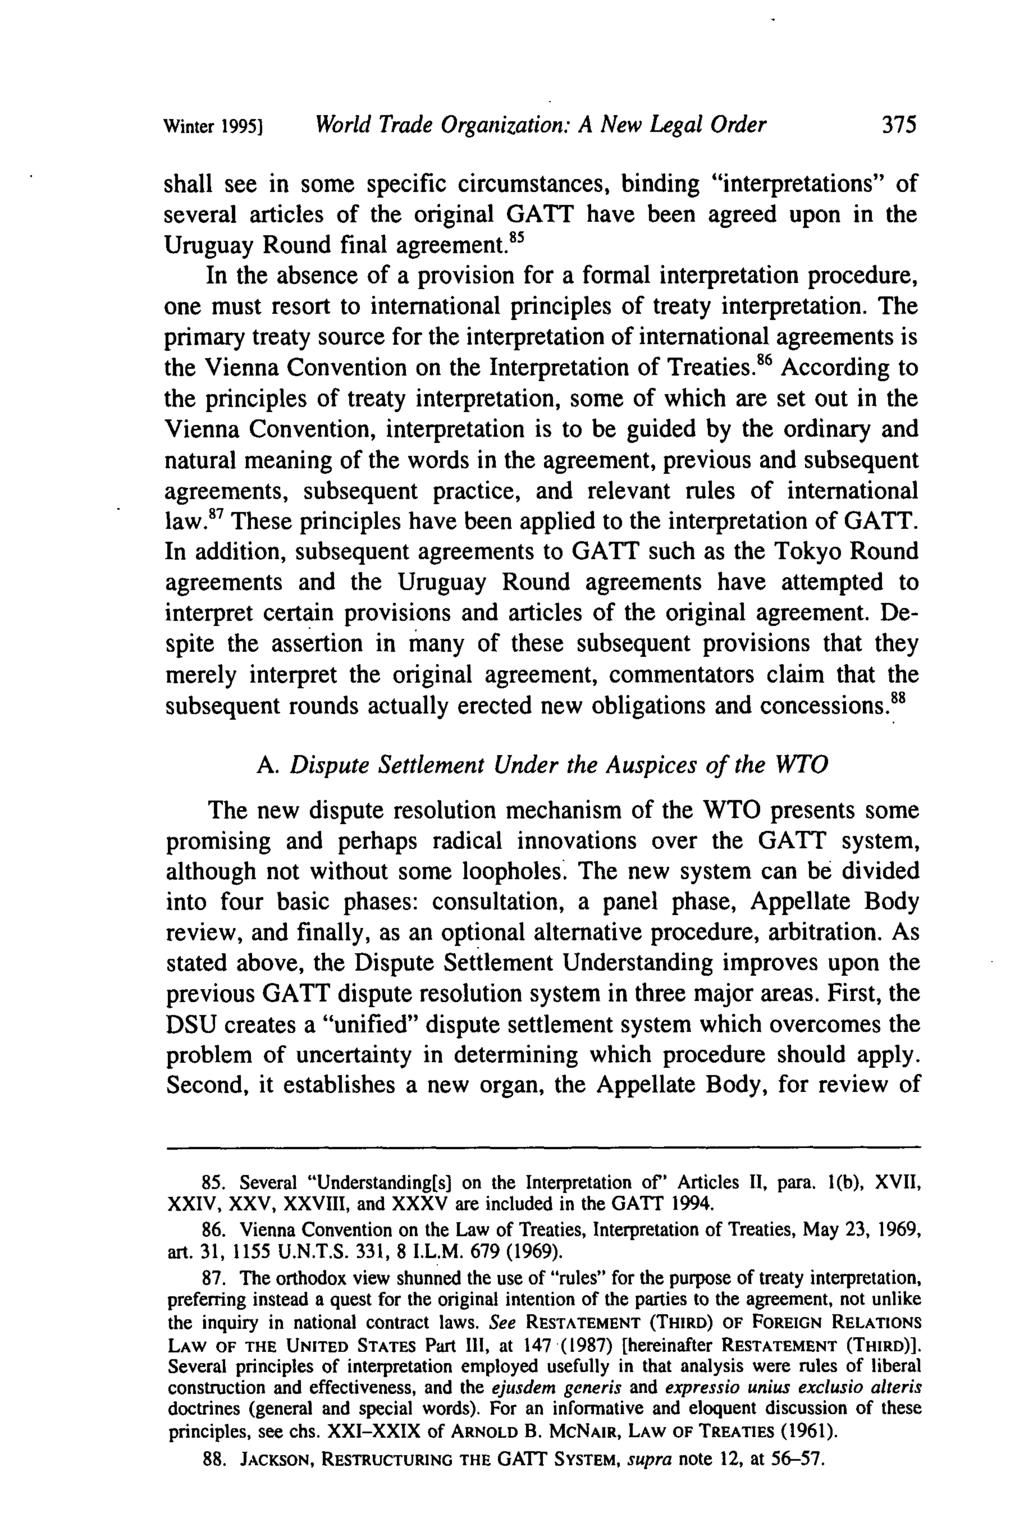 Winter 1995] World Trade Organization: A New Legal Order shall see in some specific circumstances, binding "interpretations" of several articles of the original GATT have been agreed upon in the